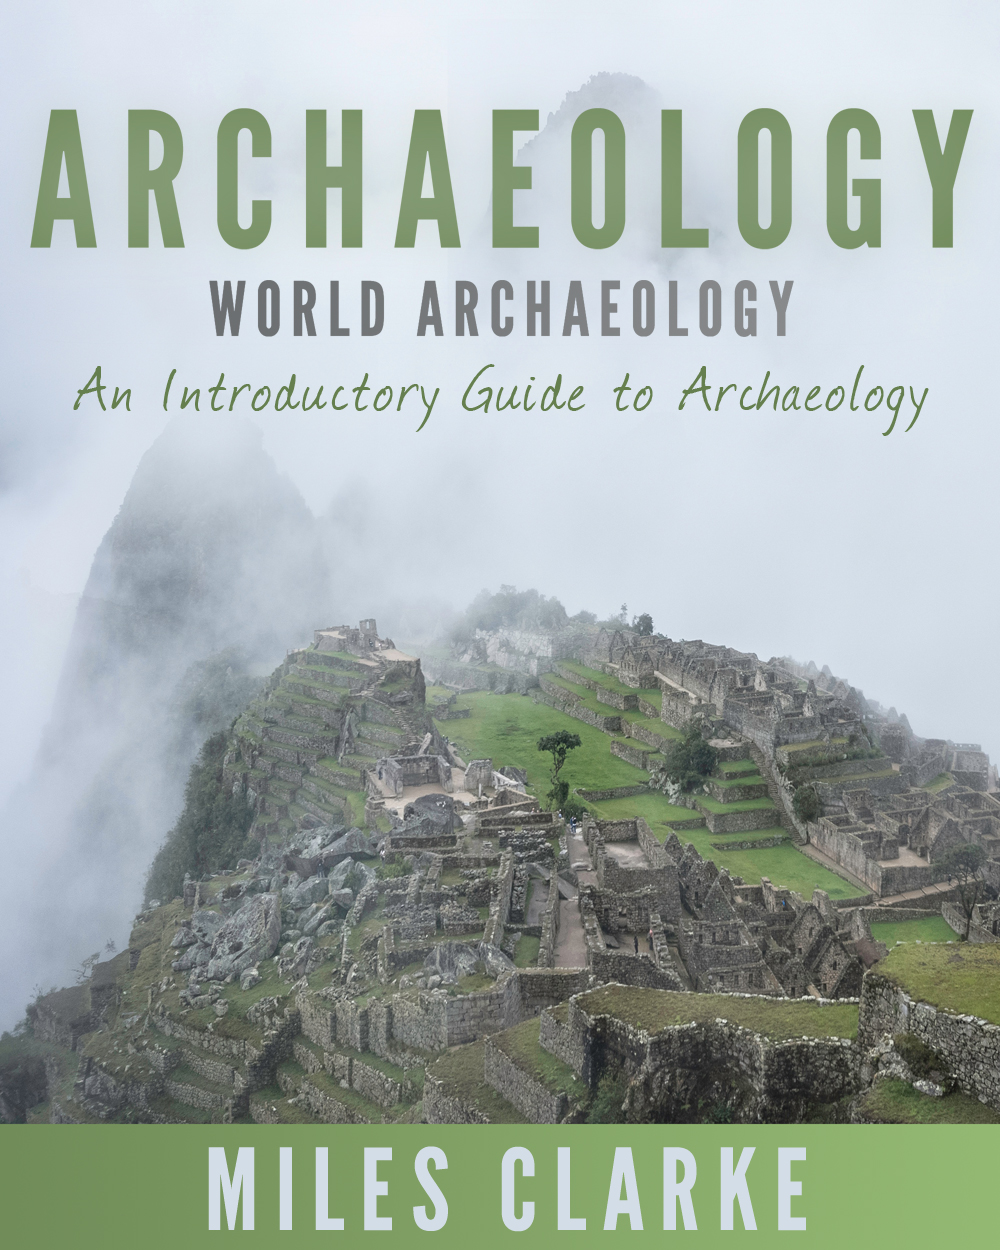 FREE: Archaeology: World Archaeology: An Introductory Guide to Archaeology by Miles Clarke